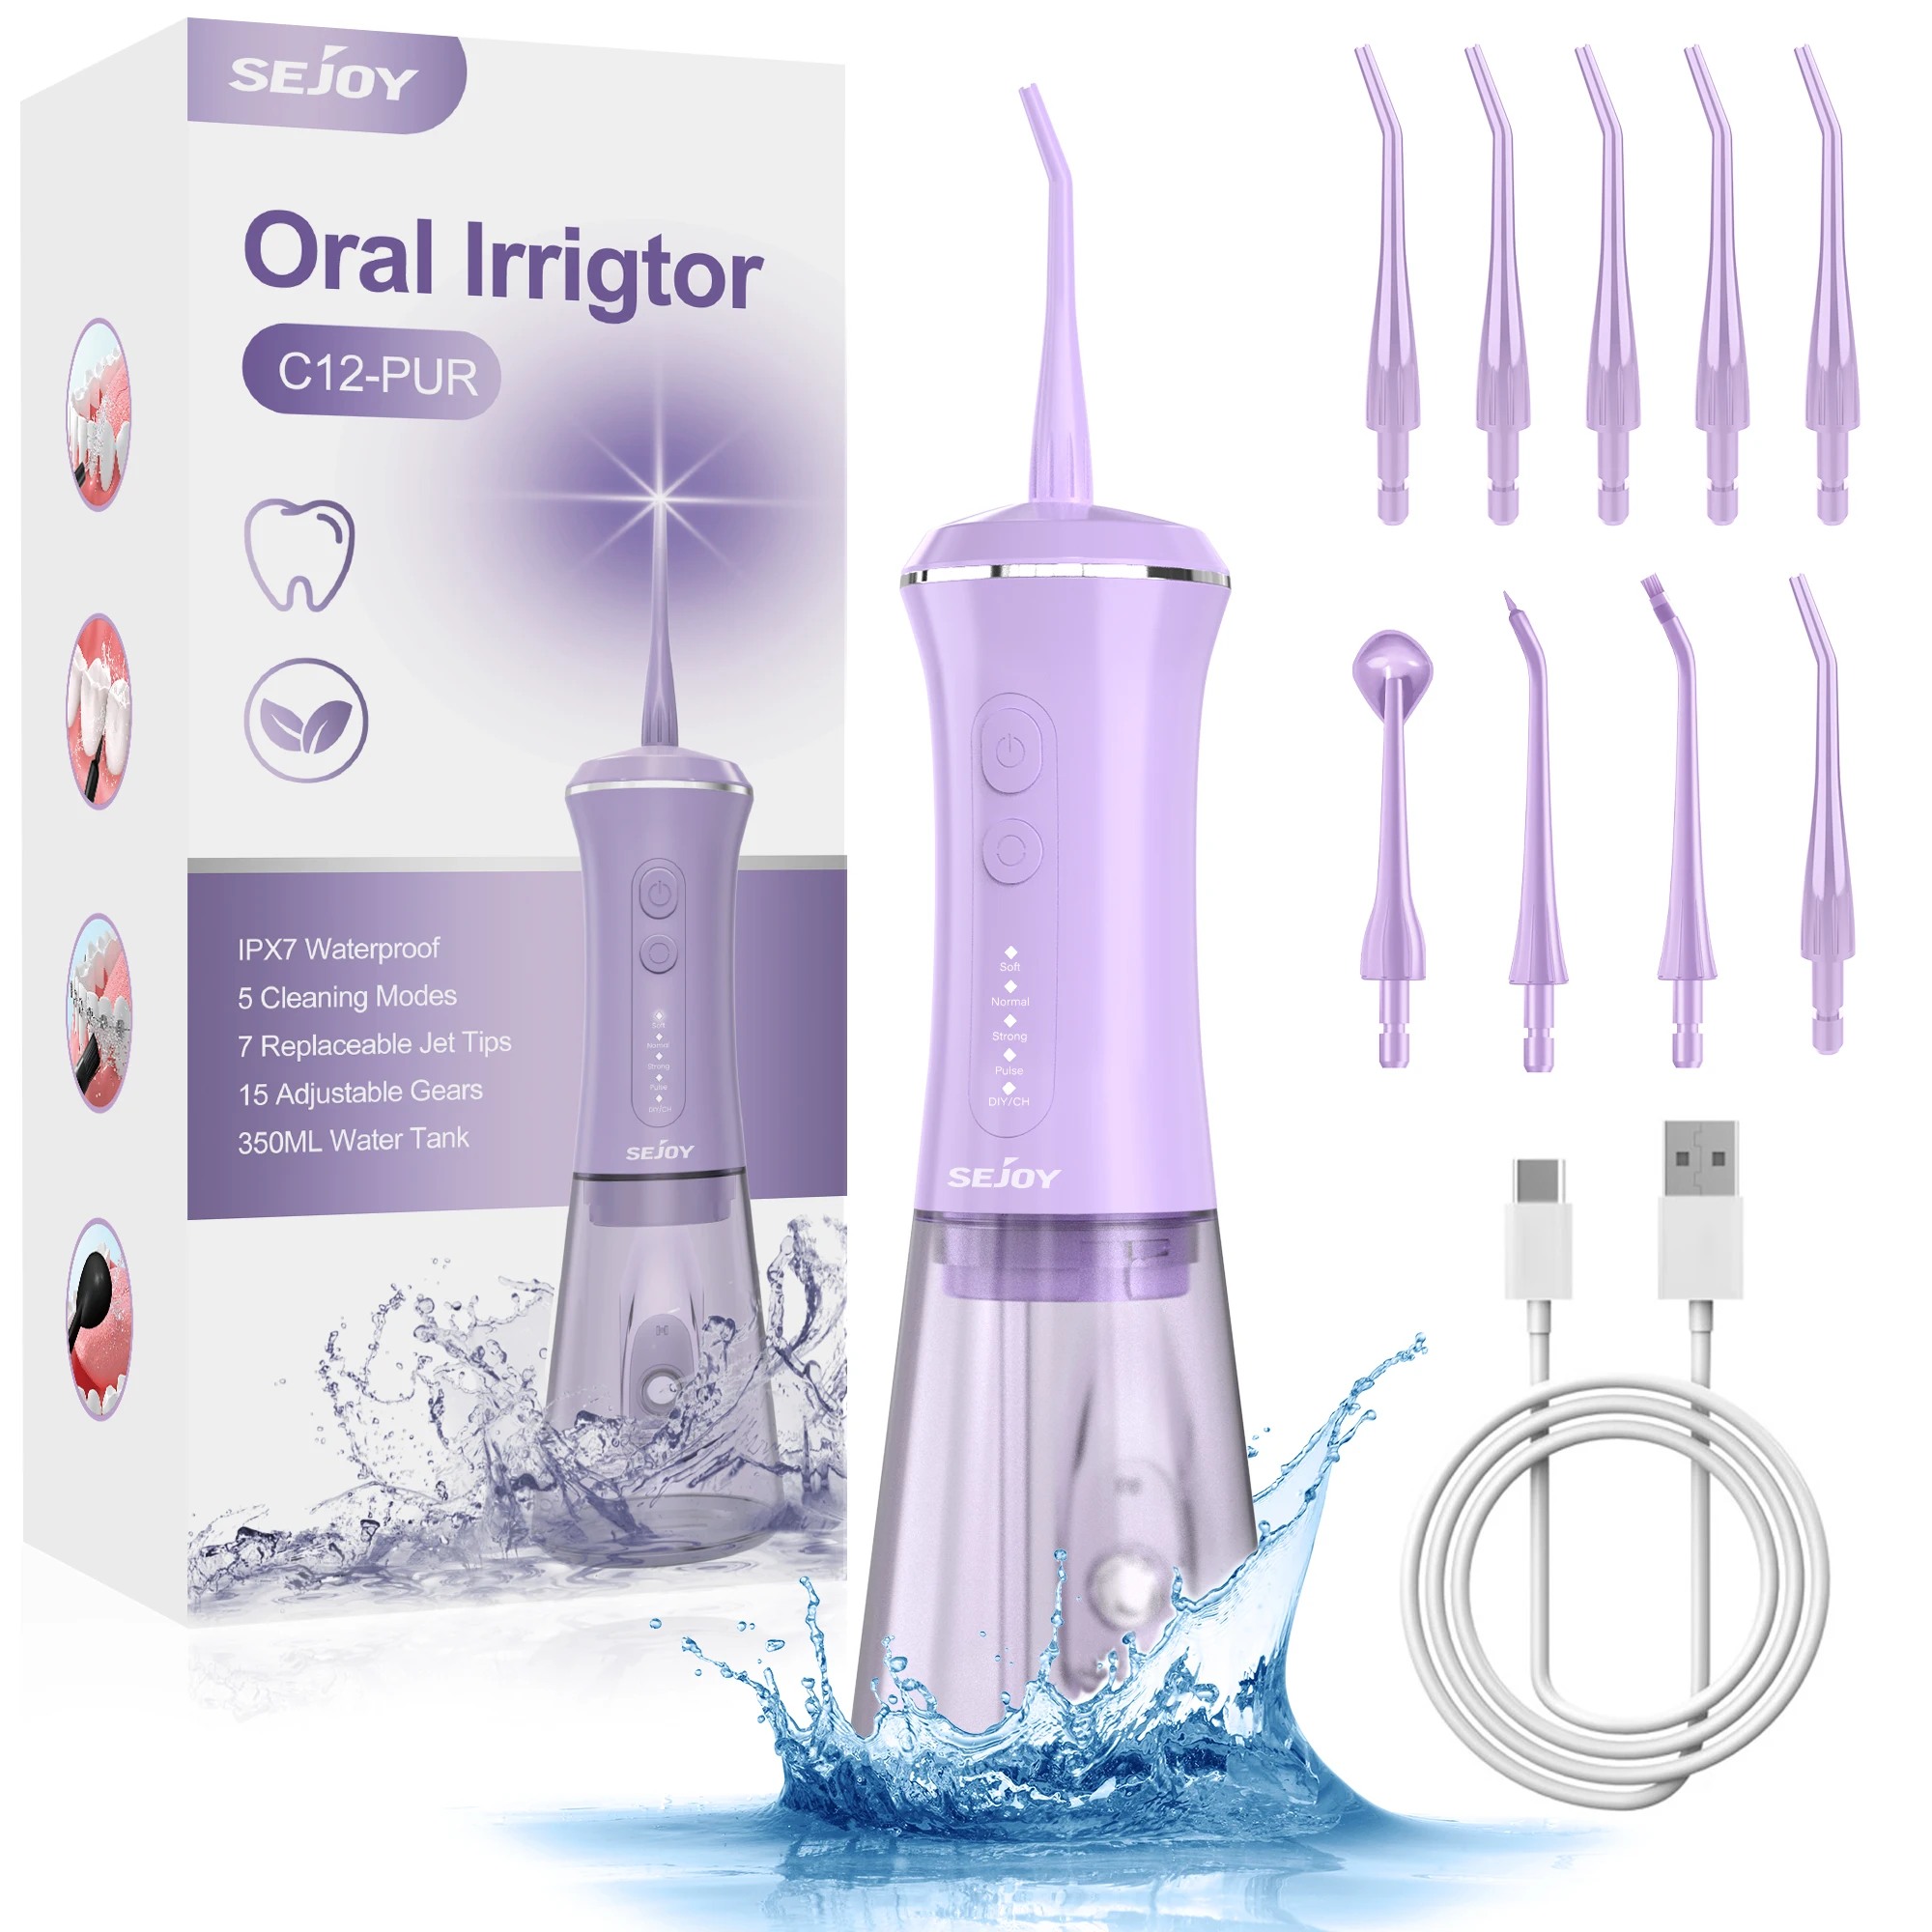 

Electric Water Flosser Rechargeable Portable Cordless Oral Irrigator Dental 350ML Irrigation Cleaner IPX7 Waterproof for Teeth